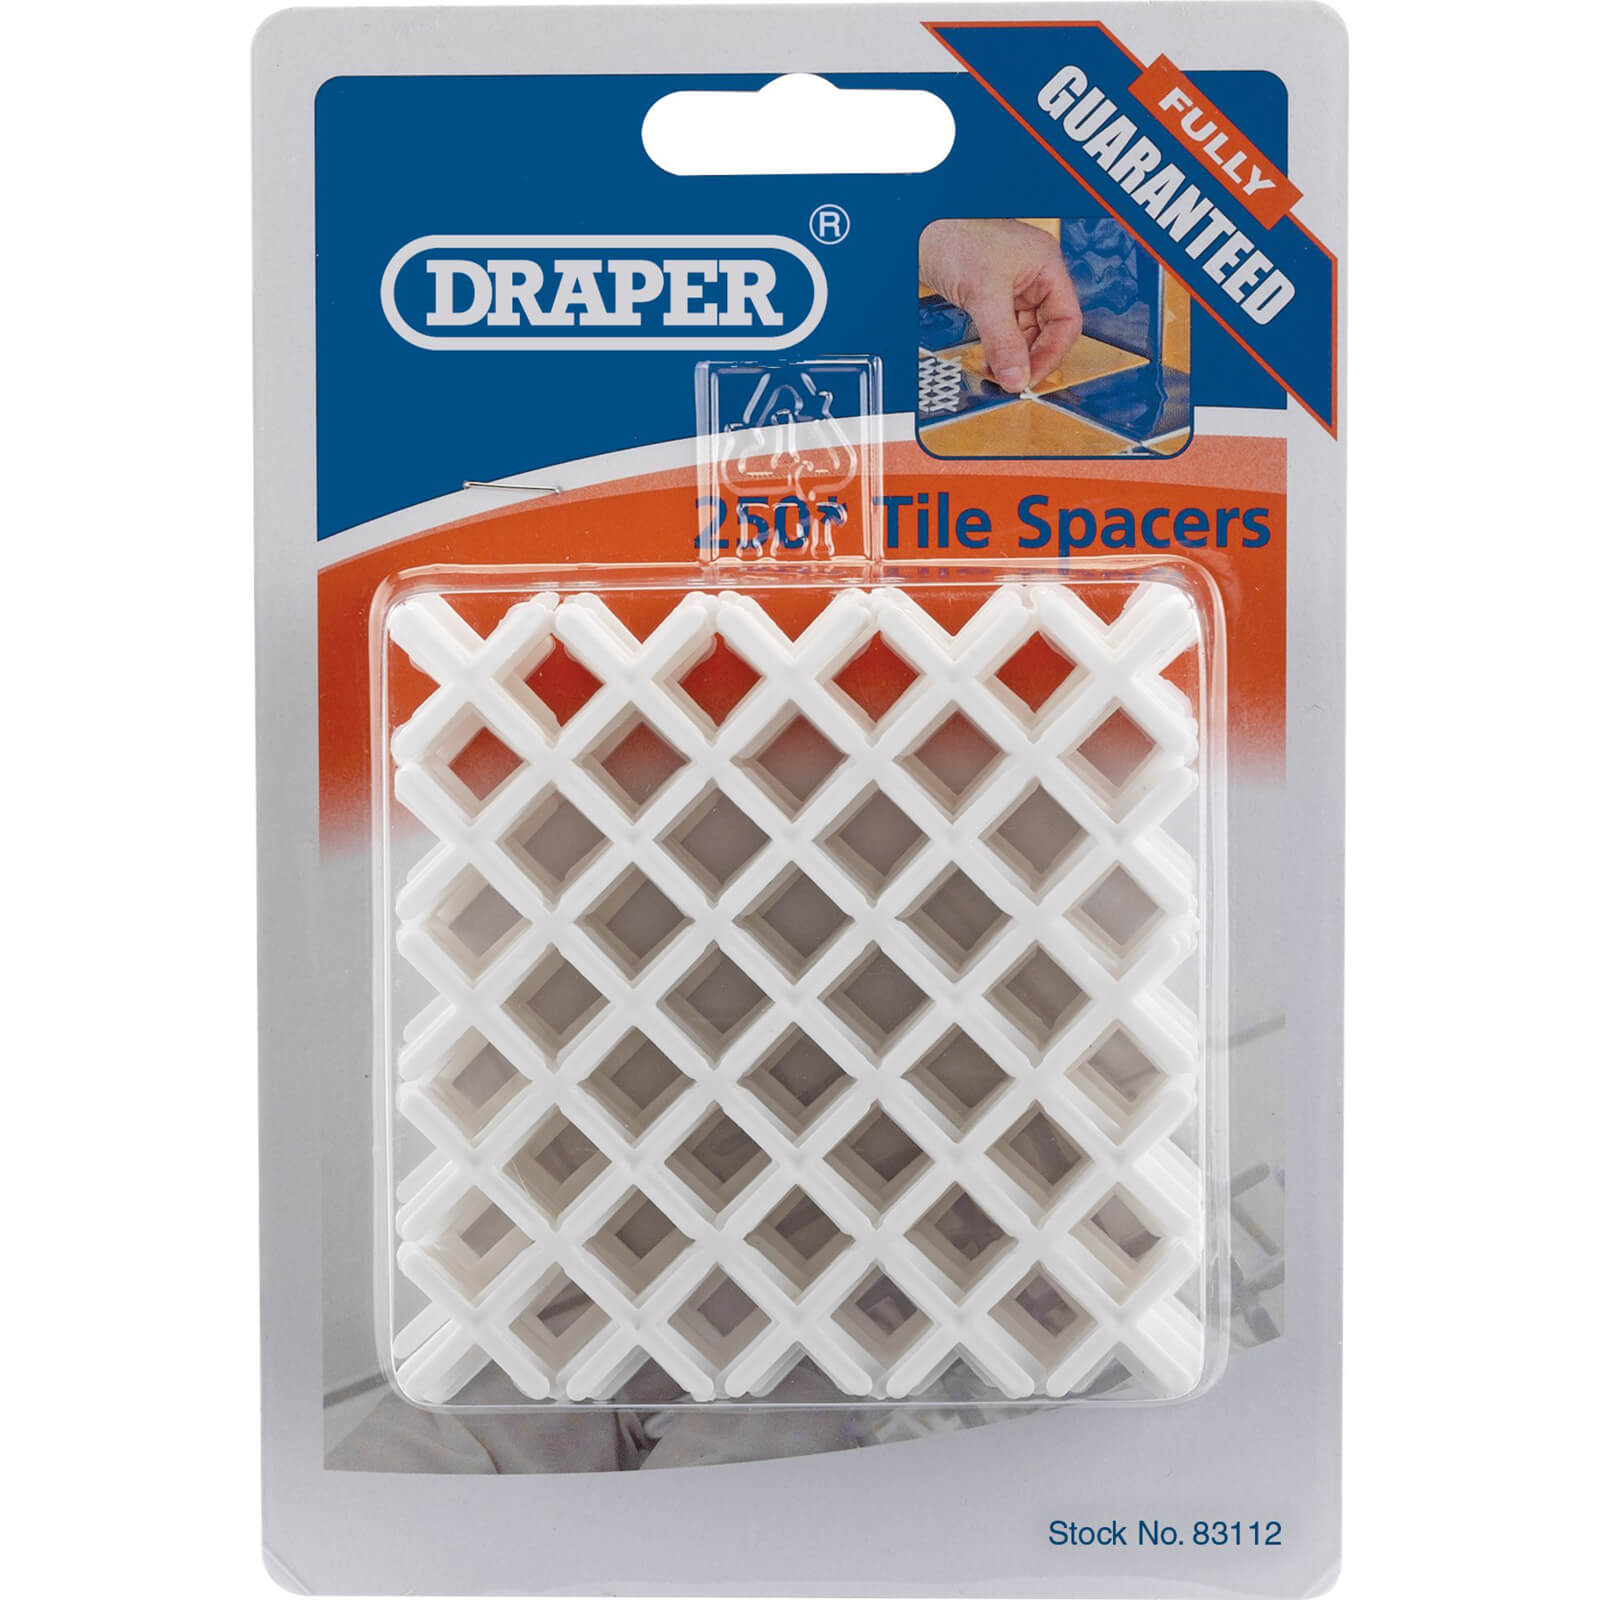 Image of Draper Tile Spacers 2mm Pack of 250